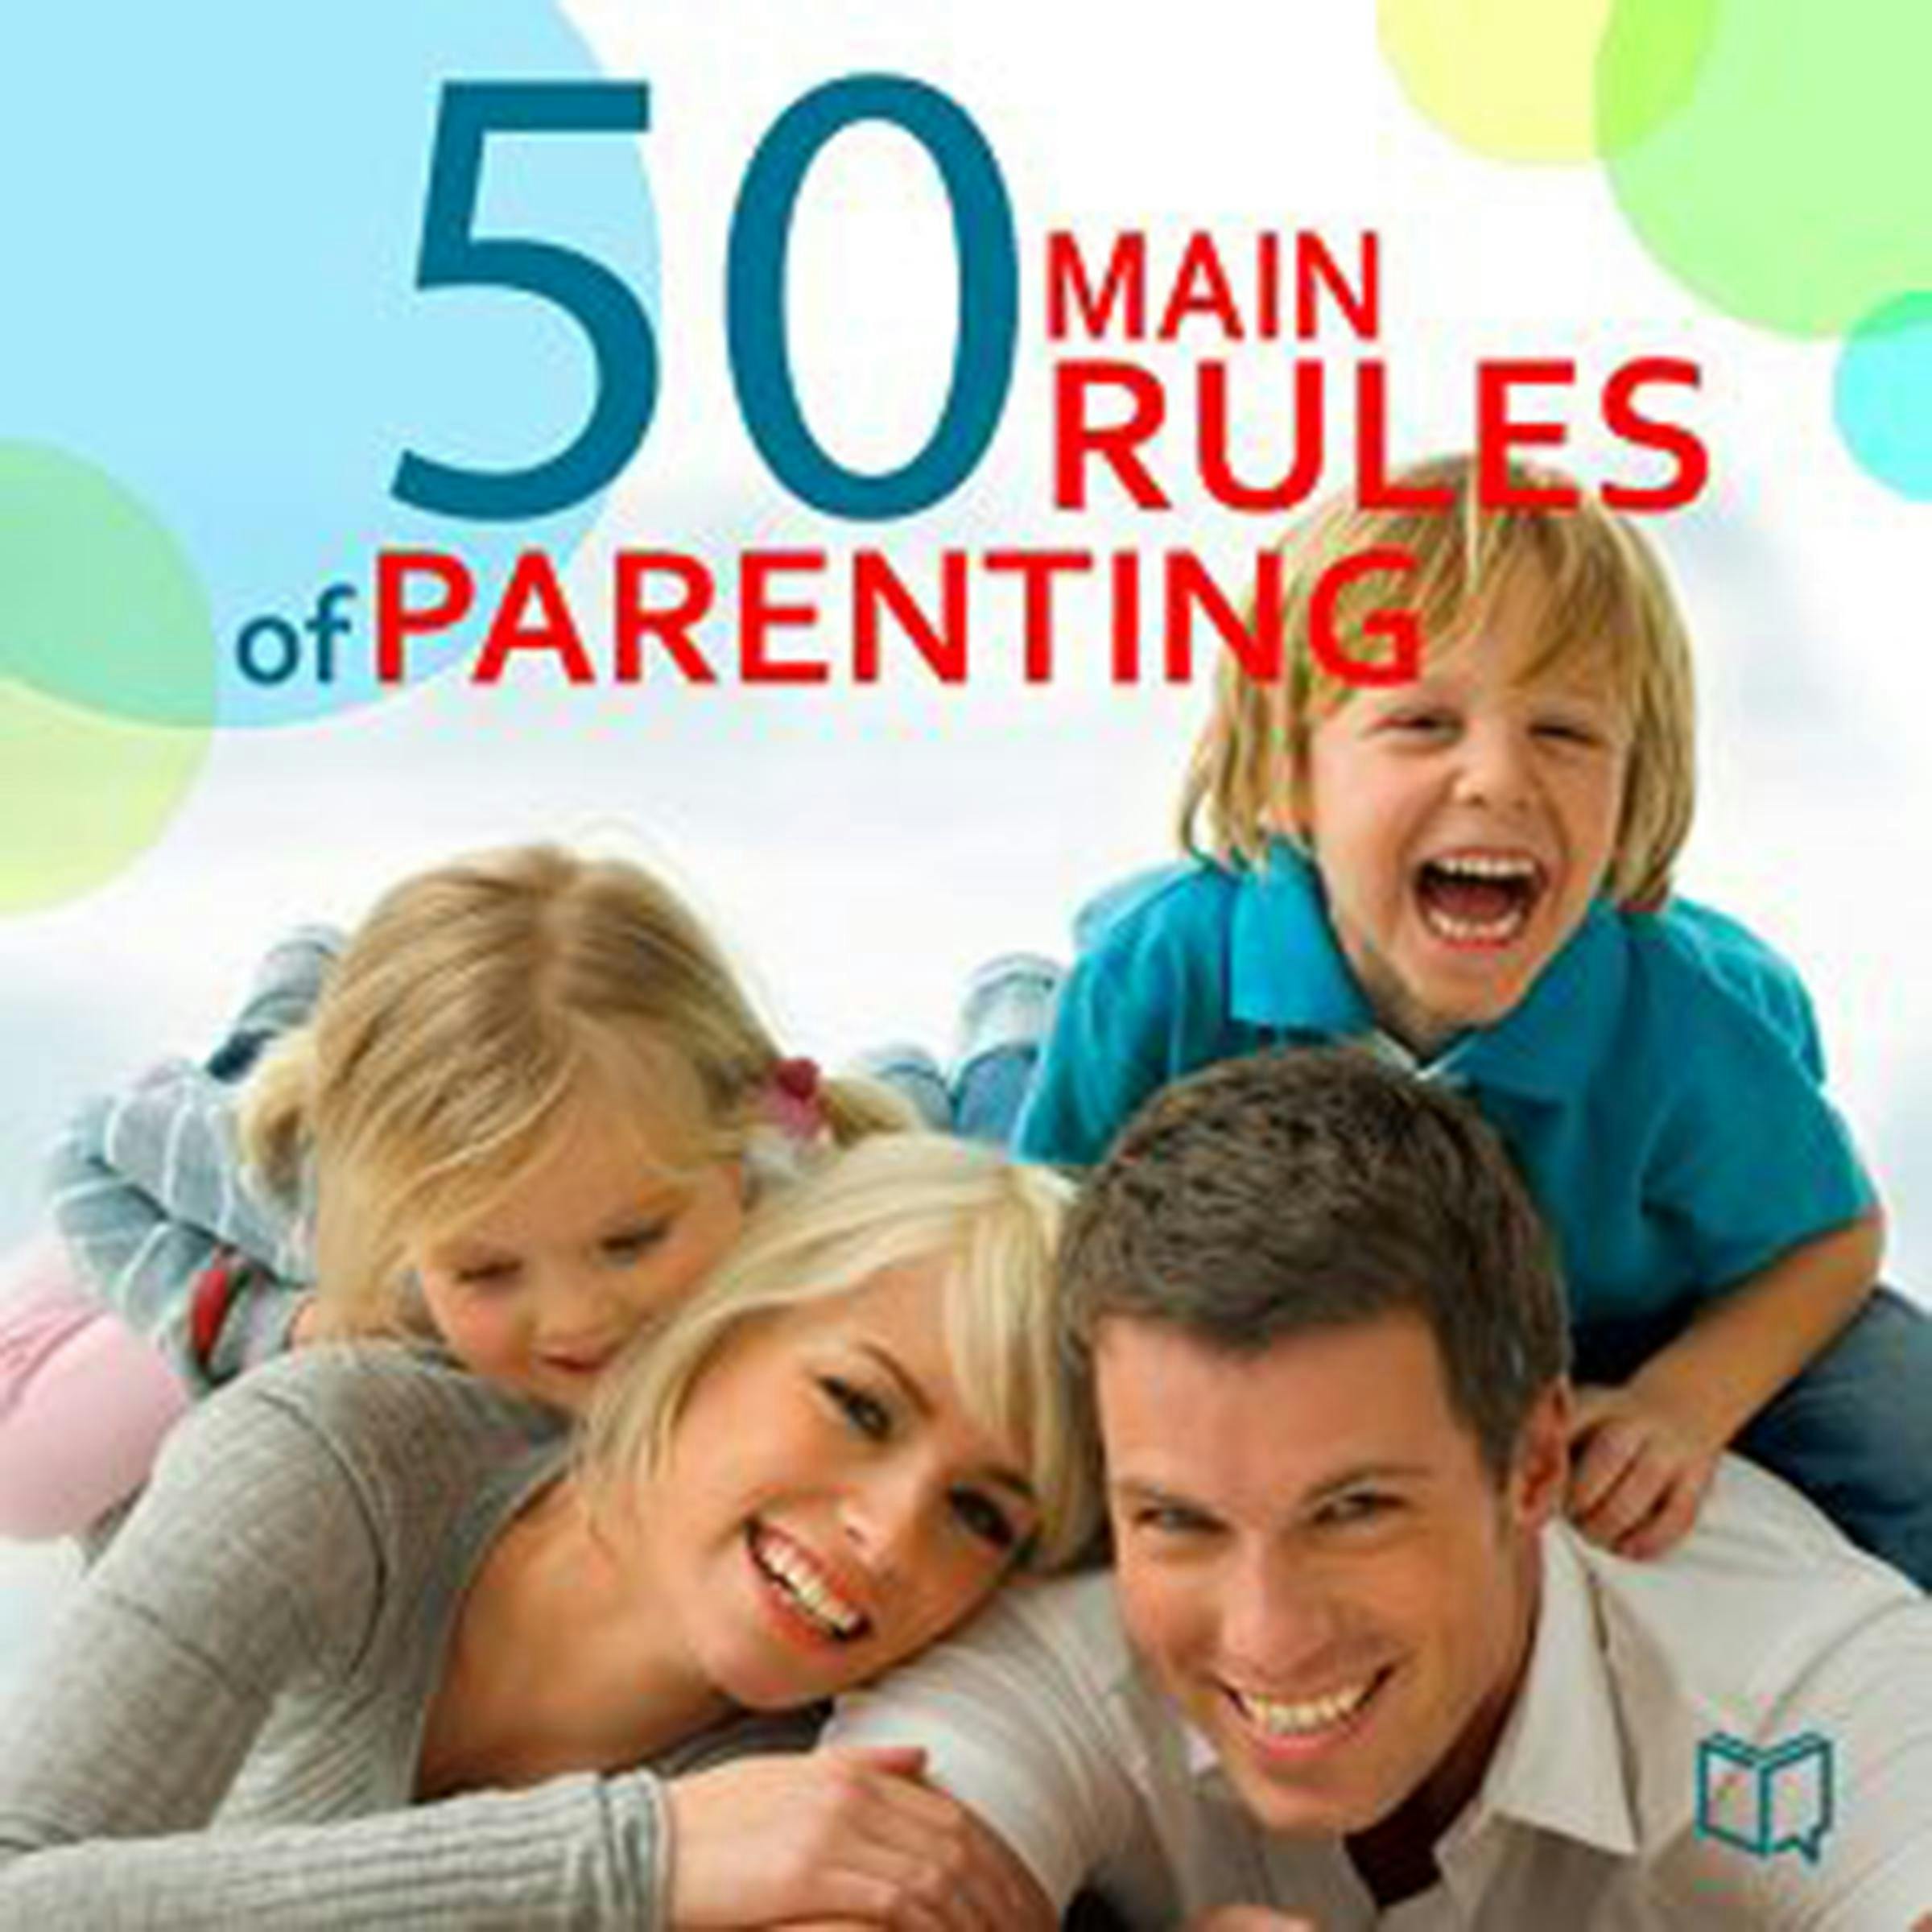 The 50 Main Rules of Parenting - undefined